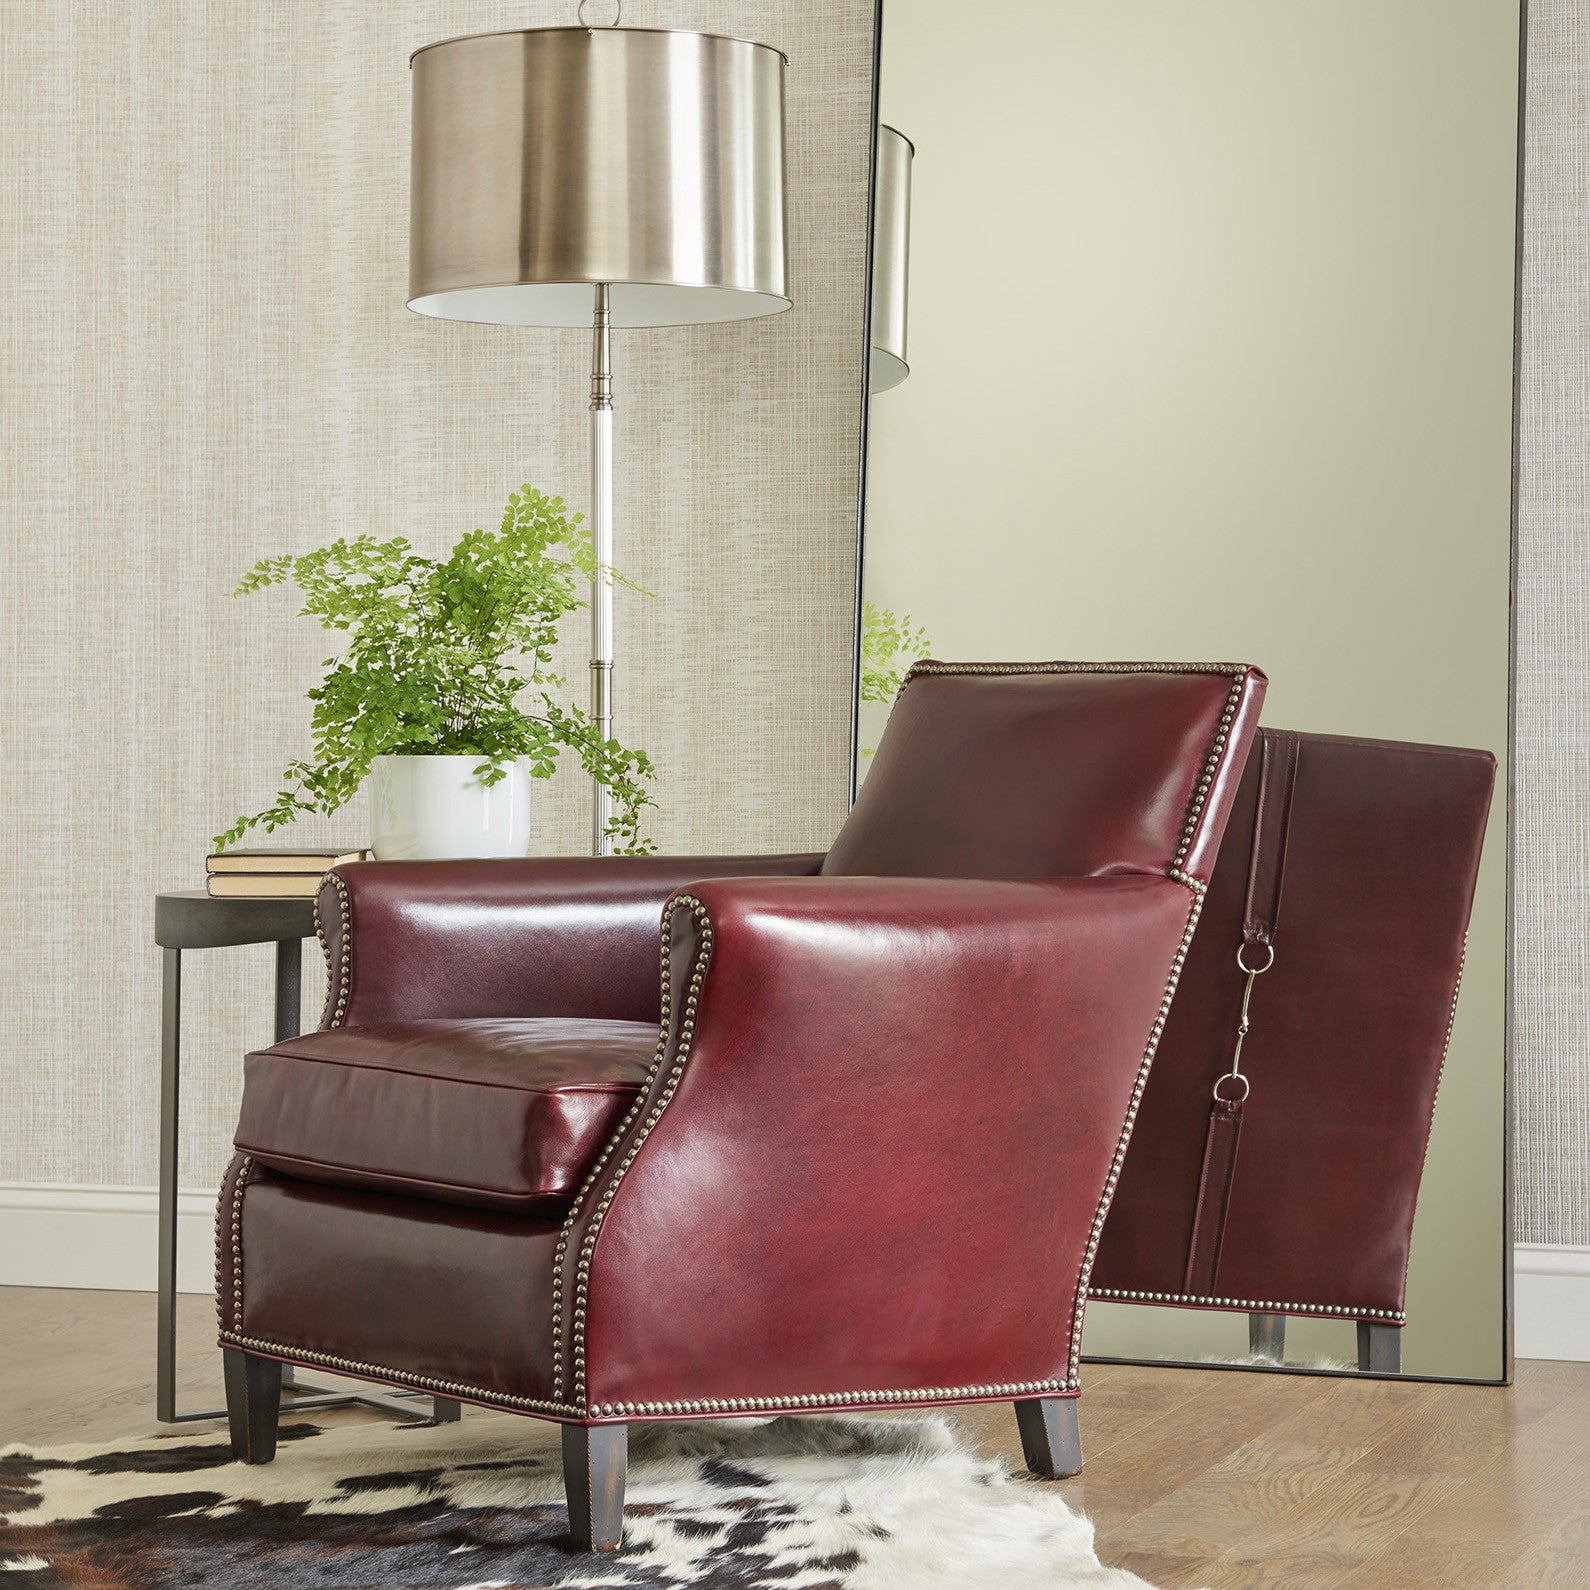 Wilborn Leather Chair by Wesley Hall shown in Matador Garnet leather and leather Bridle Banding on back